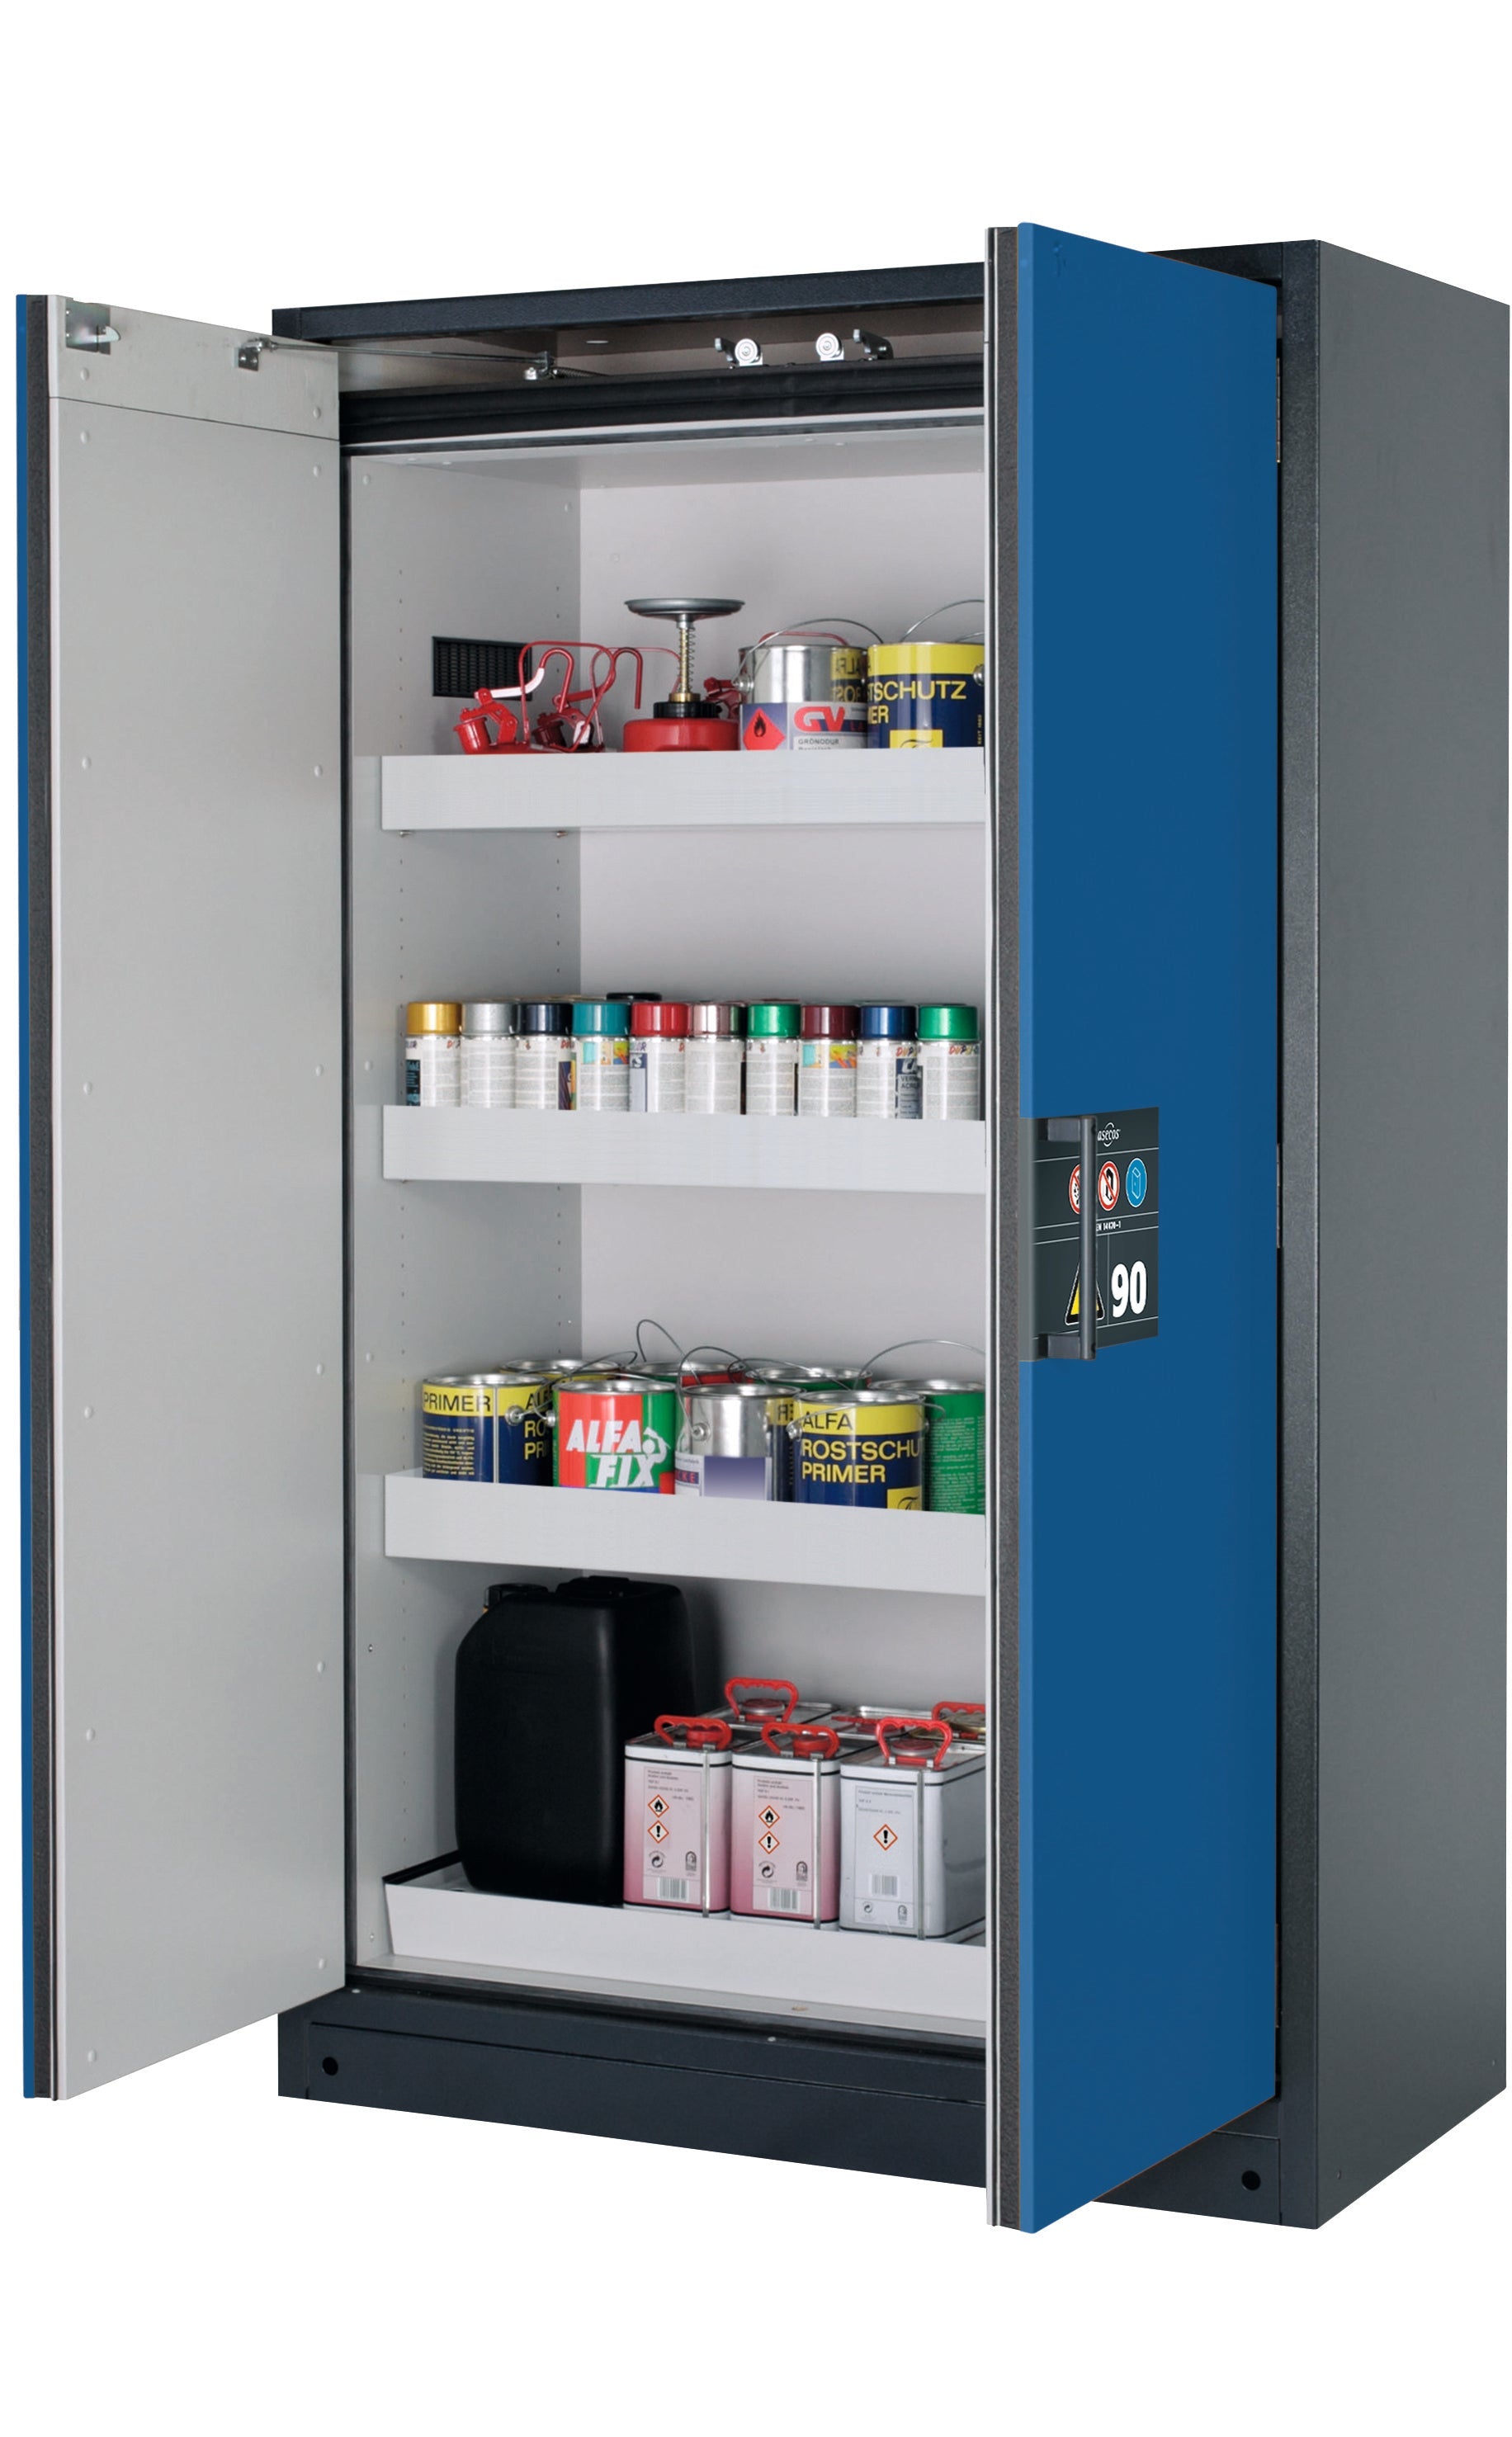 Type 90 safety storage cabinet Q-CLASSIC-90 model Q90.195.120 in gentian blue RAL 5010 with 3x tray shelf (standard) (sheet steel),